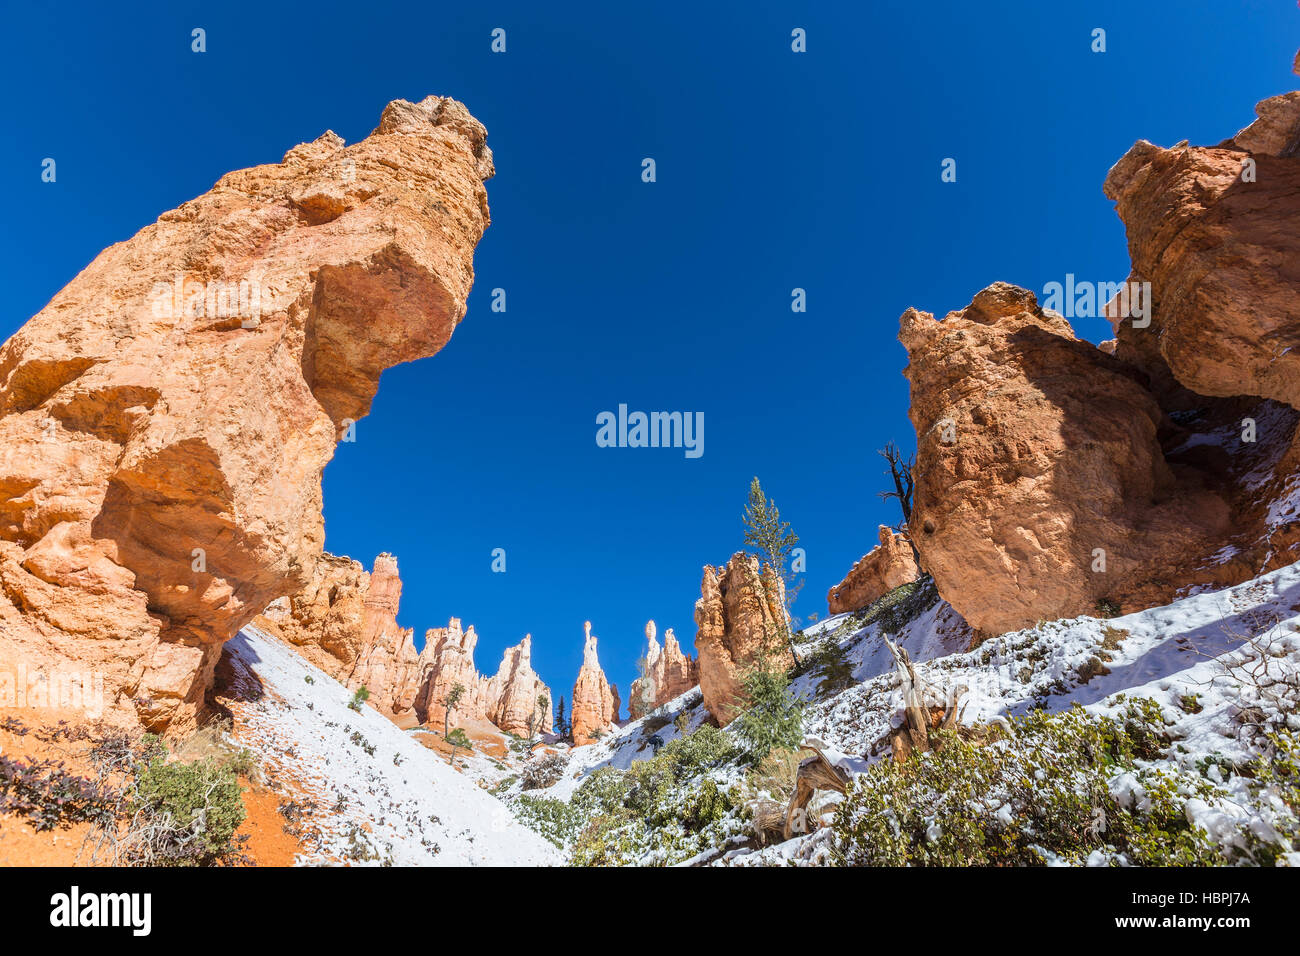 Hoodoo formations and frosty ground at Bryce Canyon National Park in Southern Utah. Stock Photo